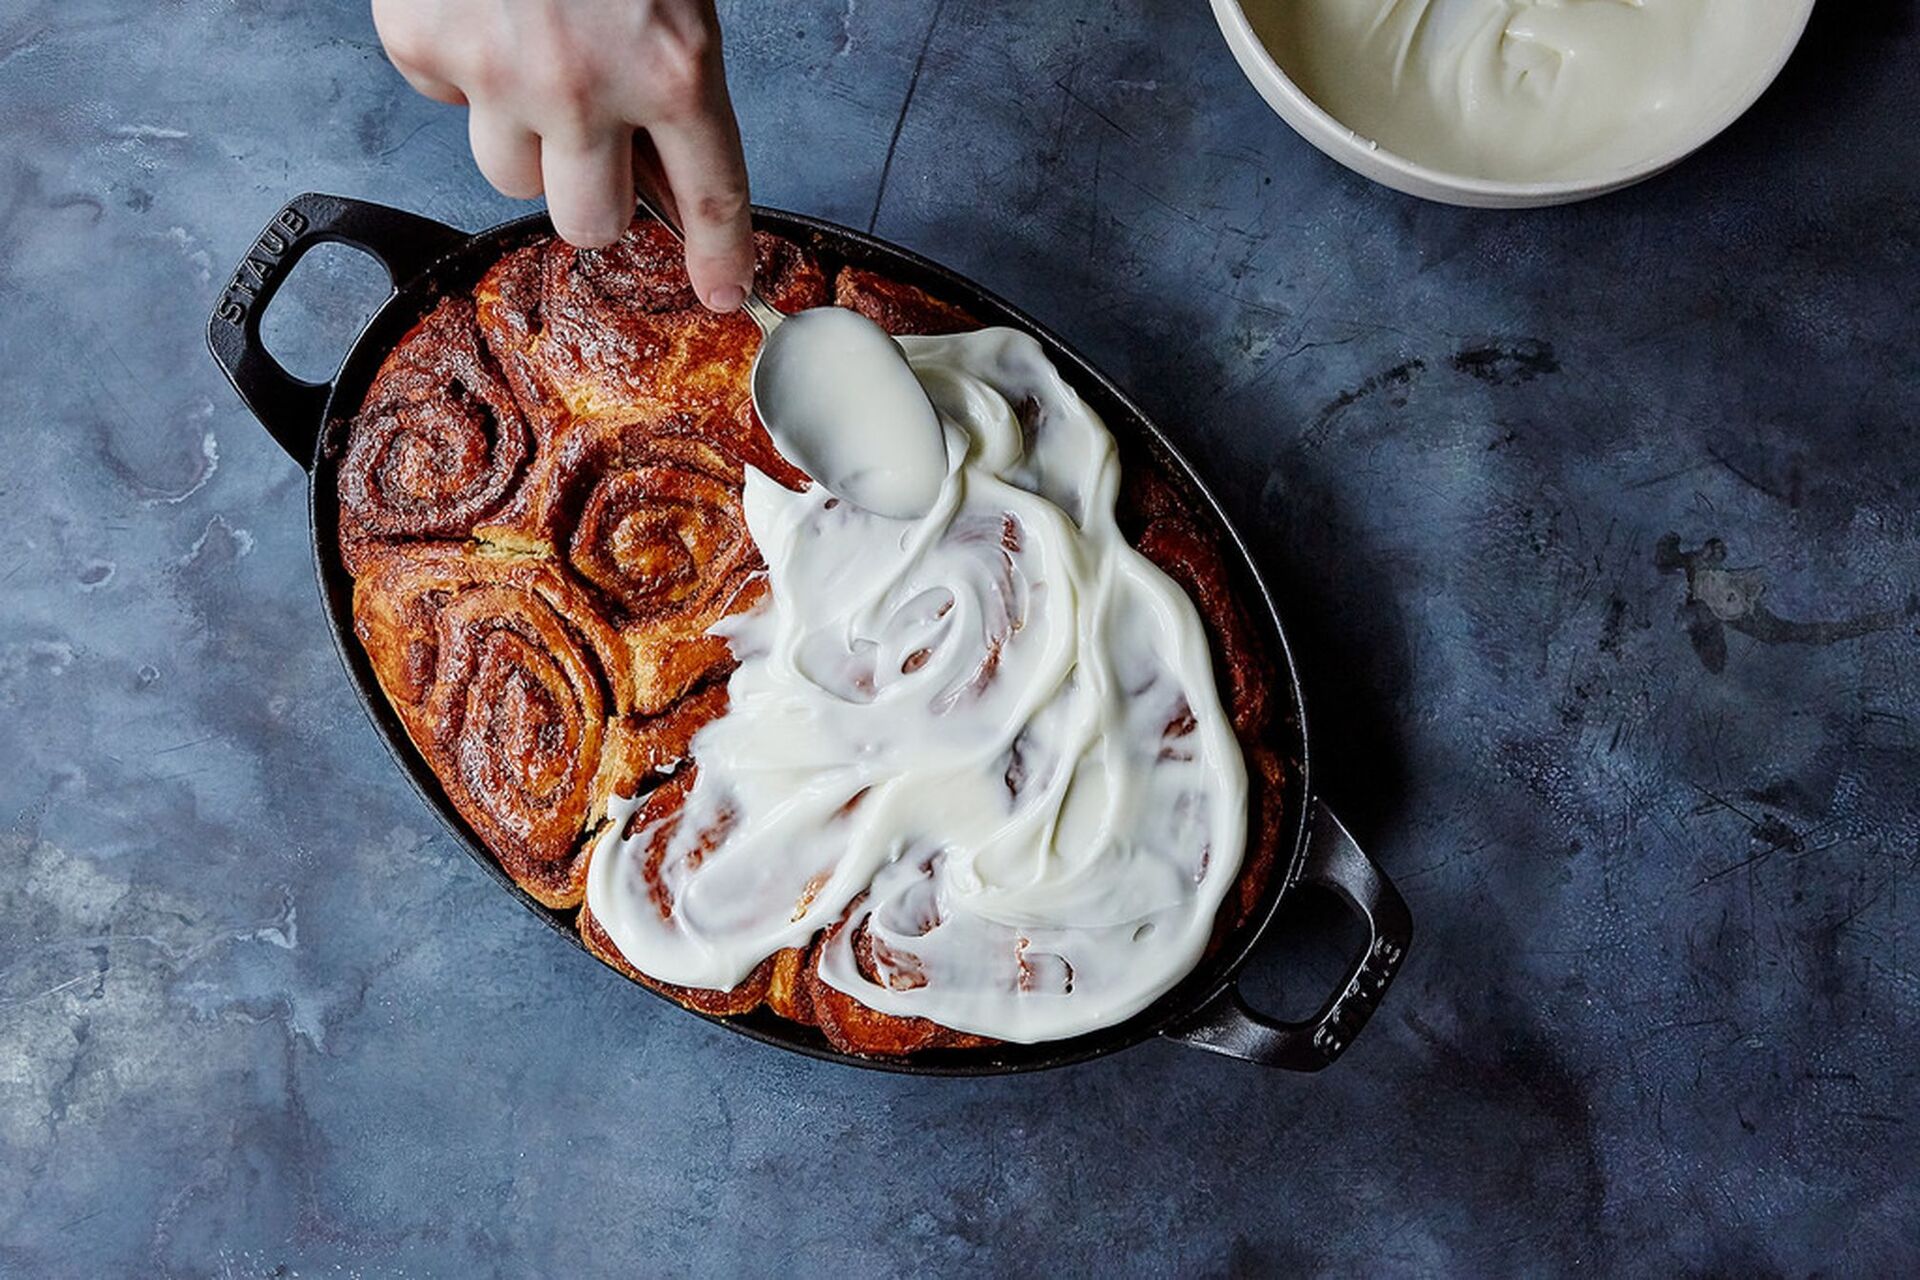 How To Make Cinnamon Rolls In Electric Skillet